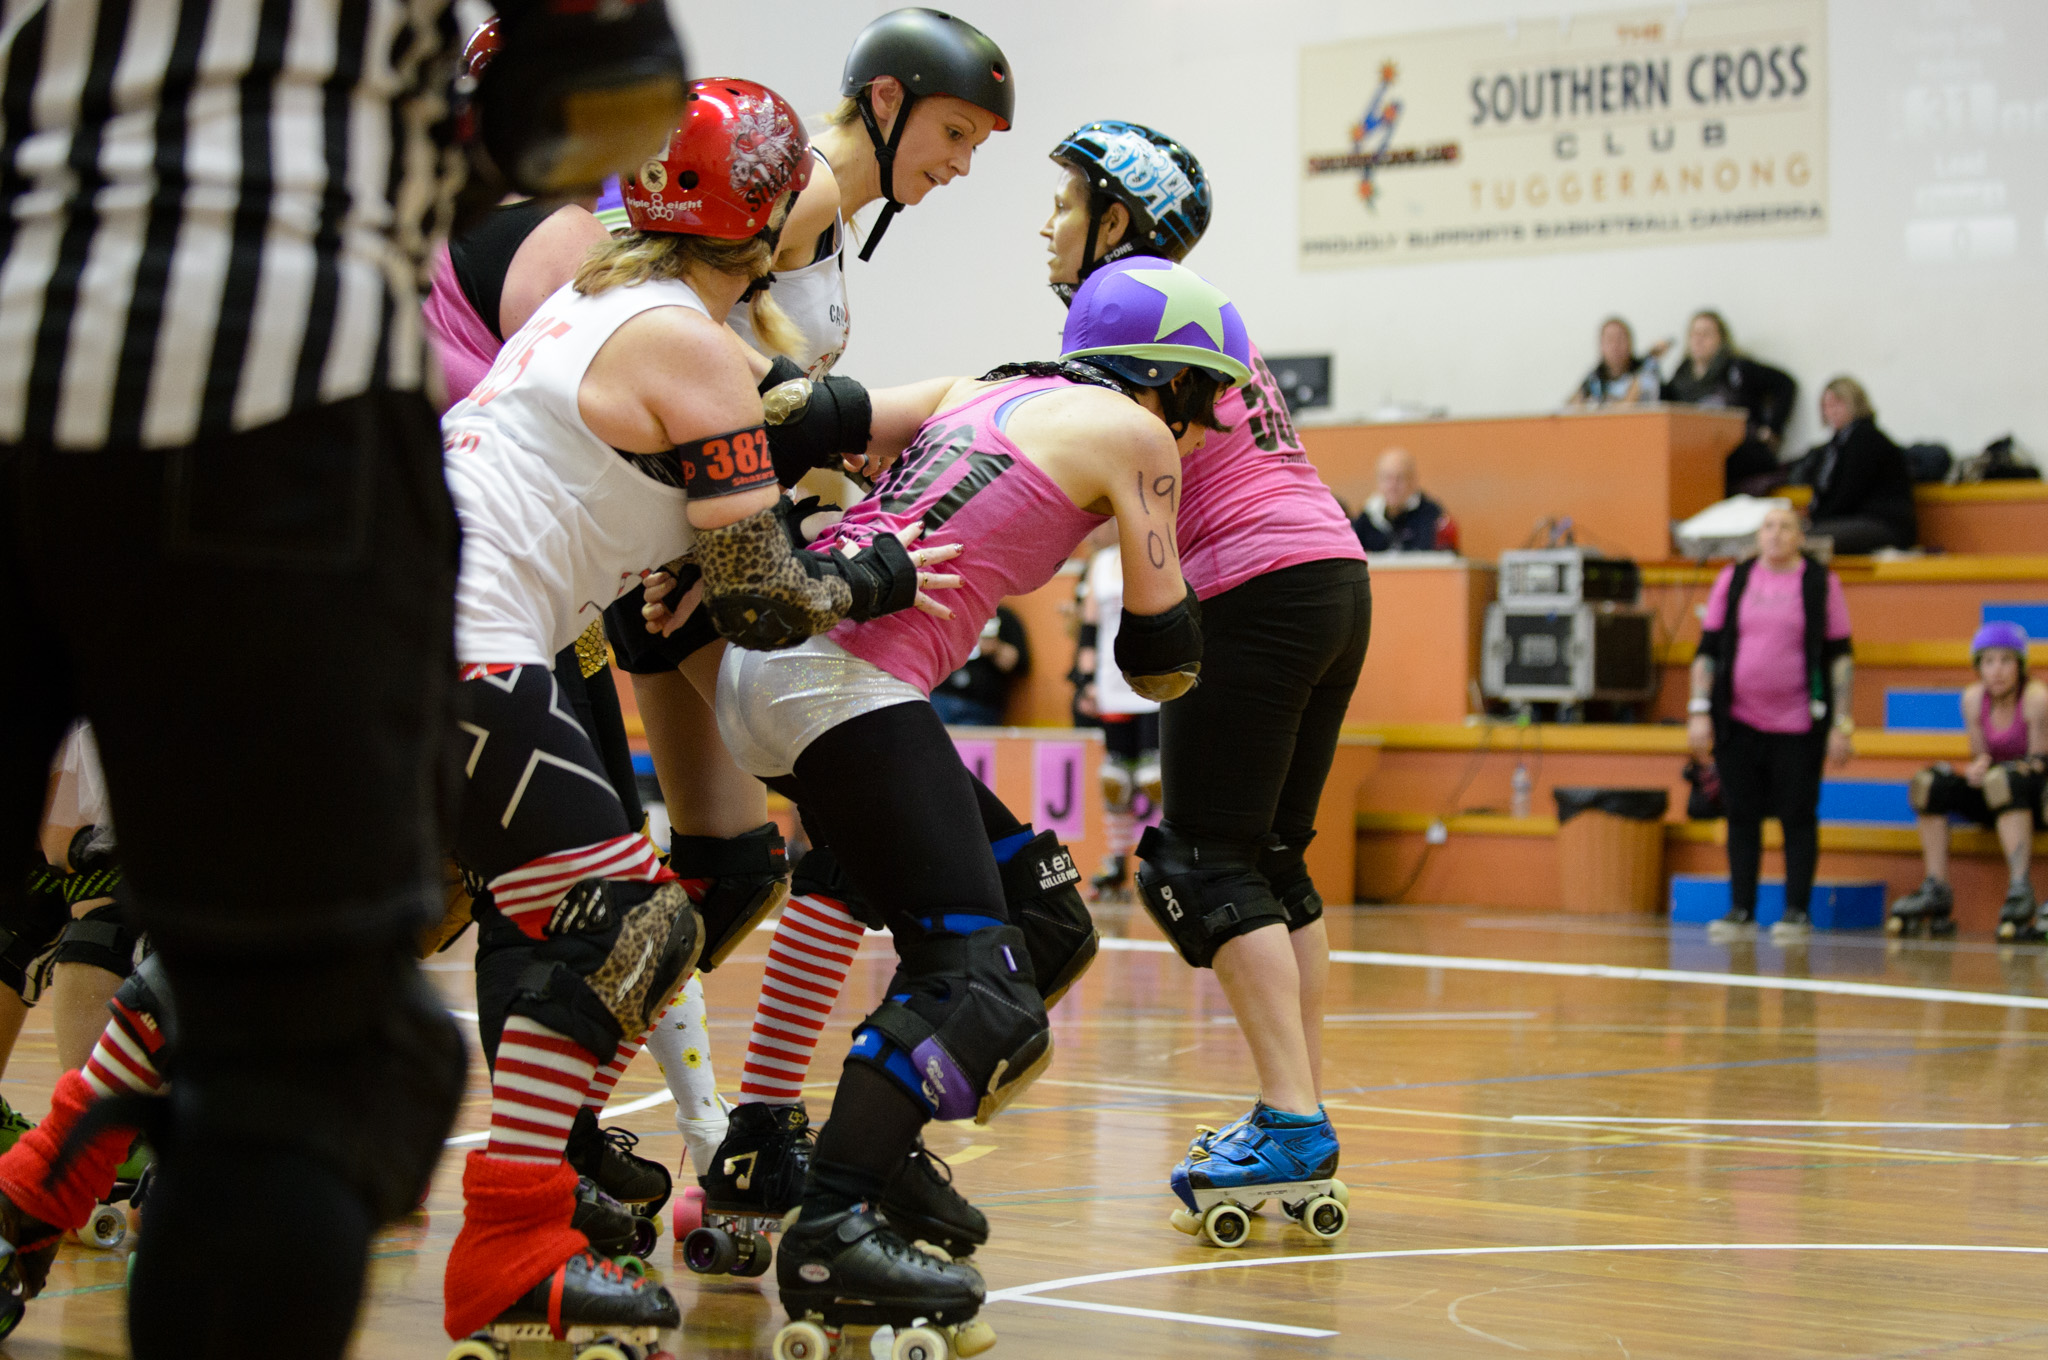 Candy Caners v Cherry Cola Rollers. Photographer: Brett Sargeant, D-eye Photography